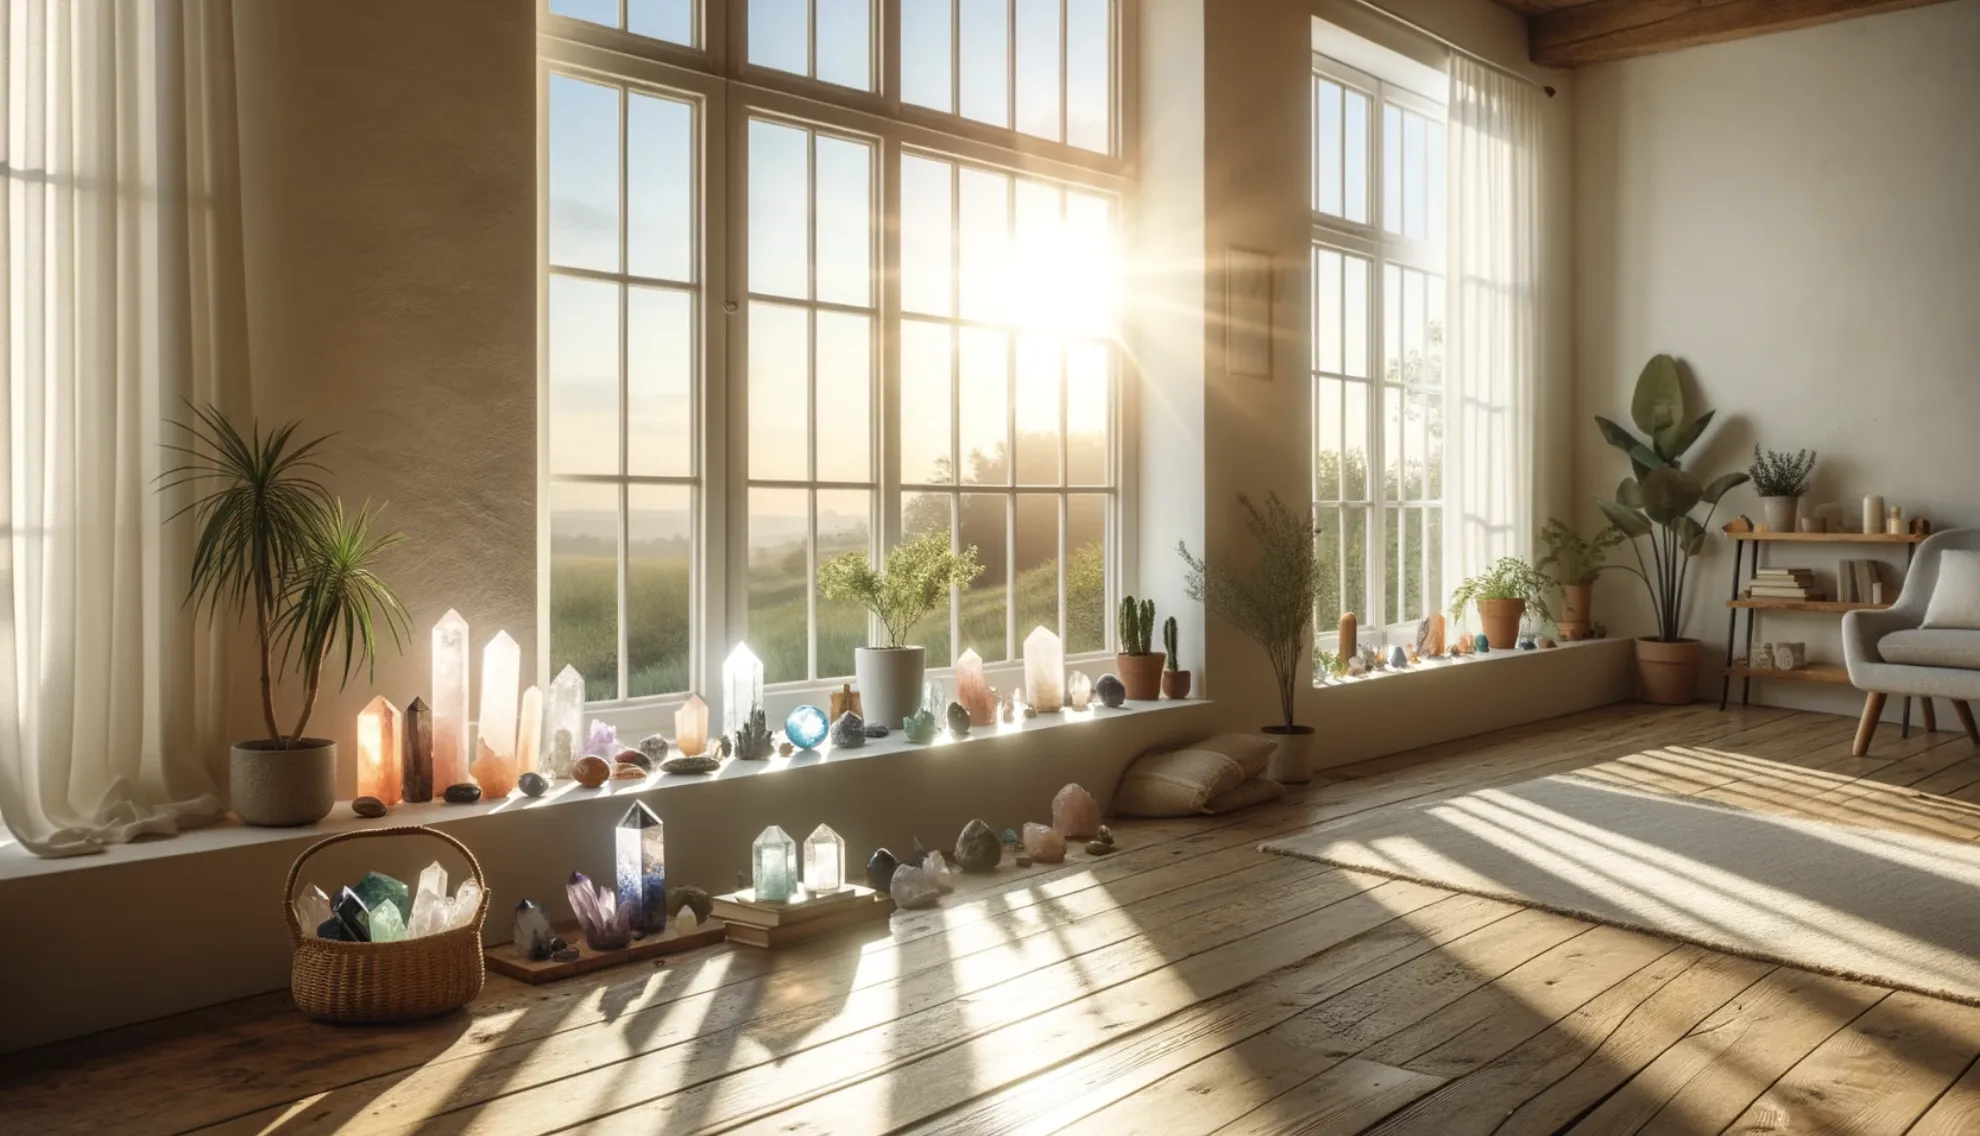 multiple healing crystals in a sun-lit room 